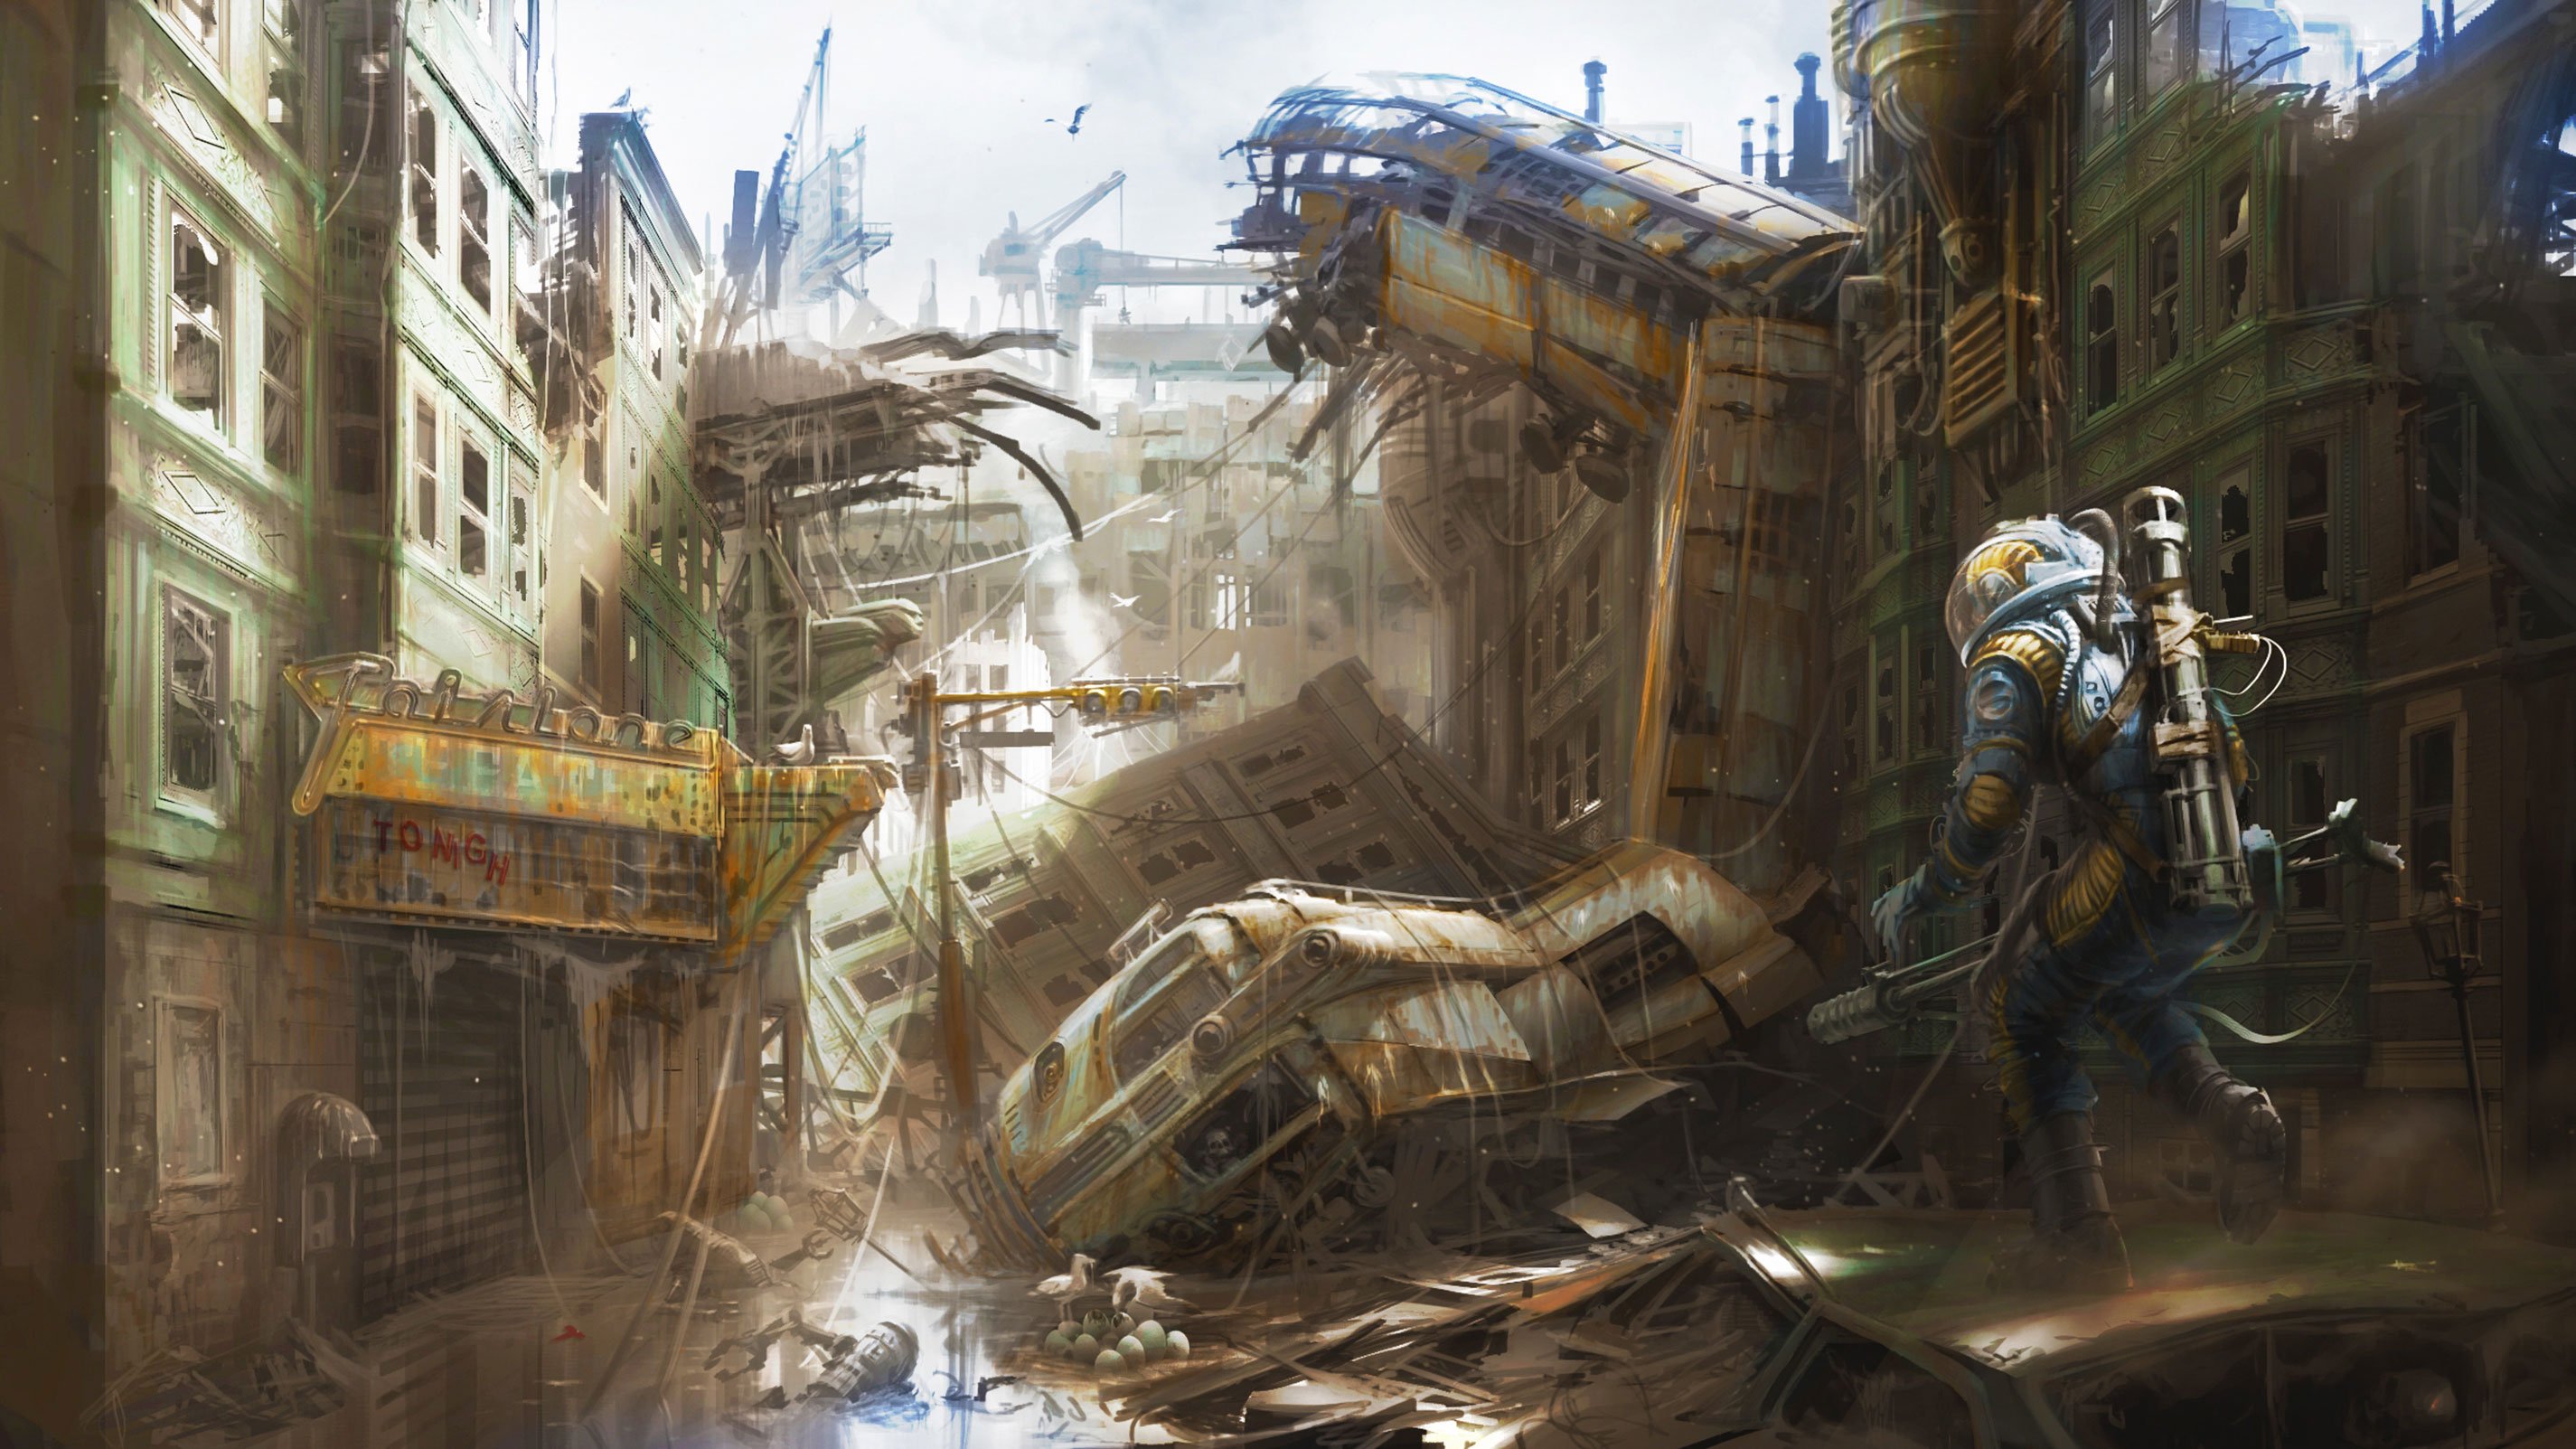 fallout, Sci fi, Warrior, Action, Fighting, Shooter, Sci fi, Futuristic, Apocalyptic Wallpaper